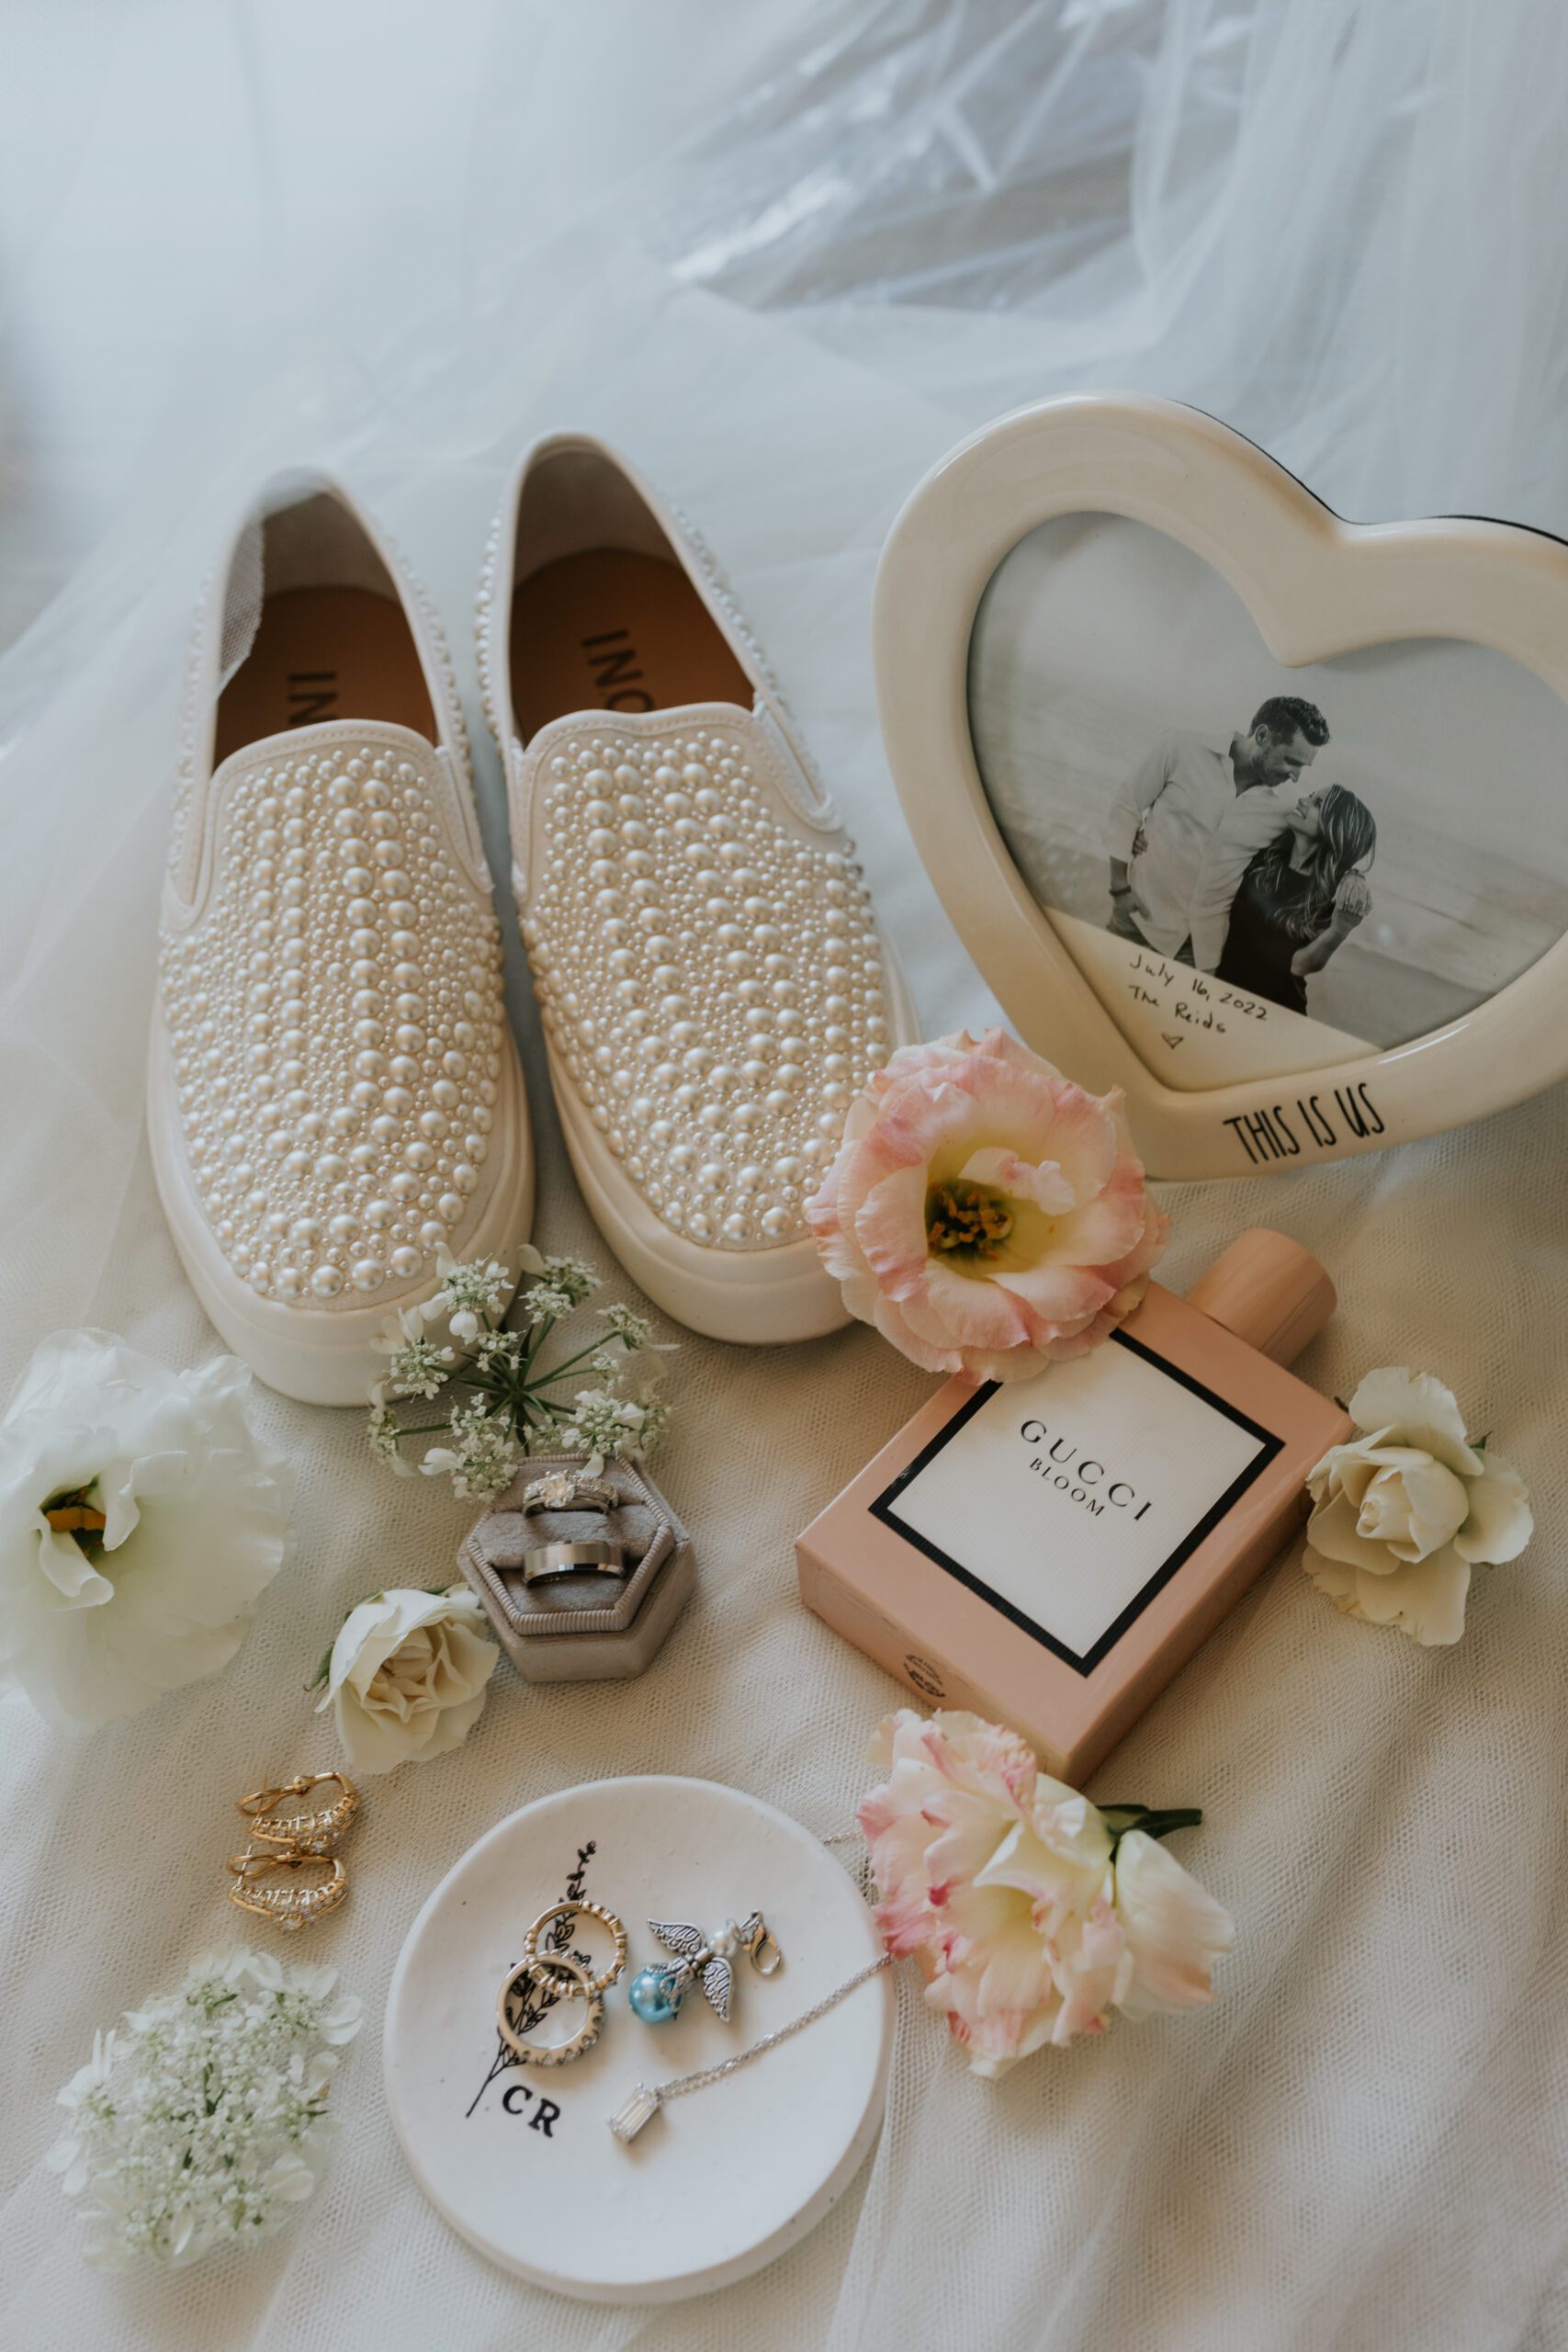 Wedding flat lay photograph featuring the bride's shoes, a picture frame, perfume, rings, earrings, and flowers